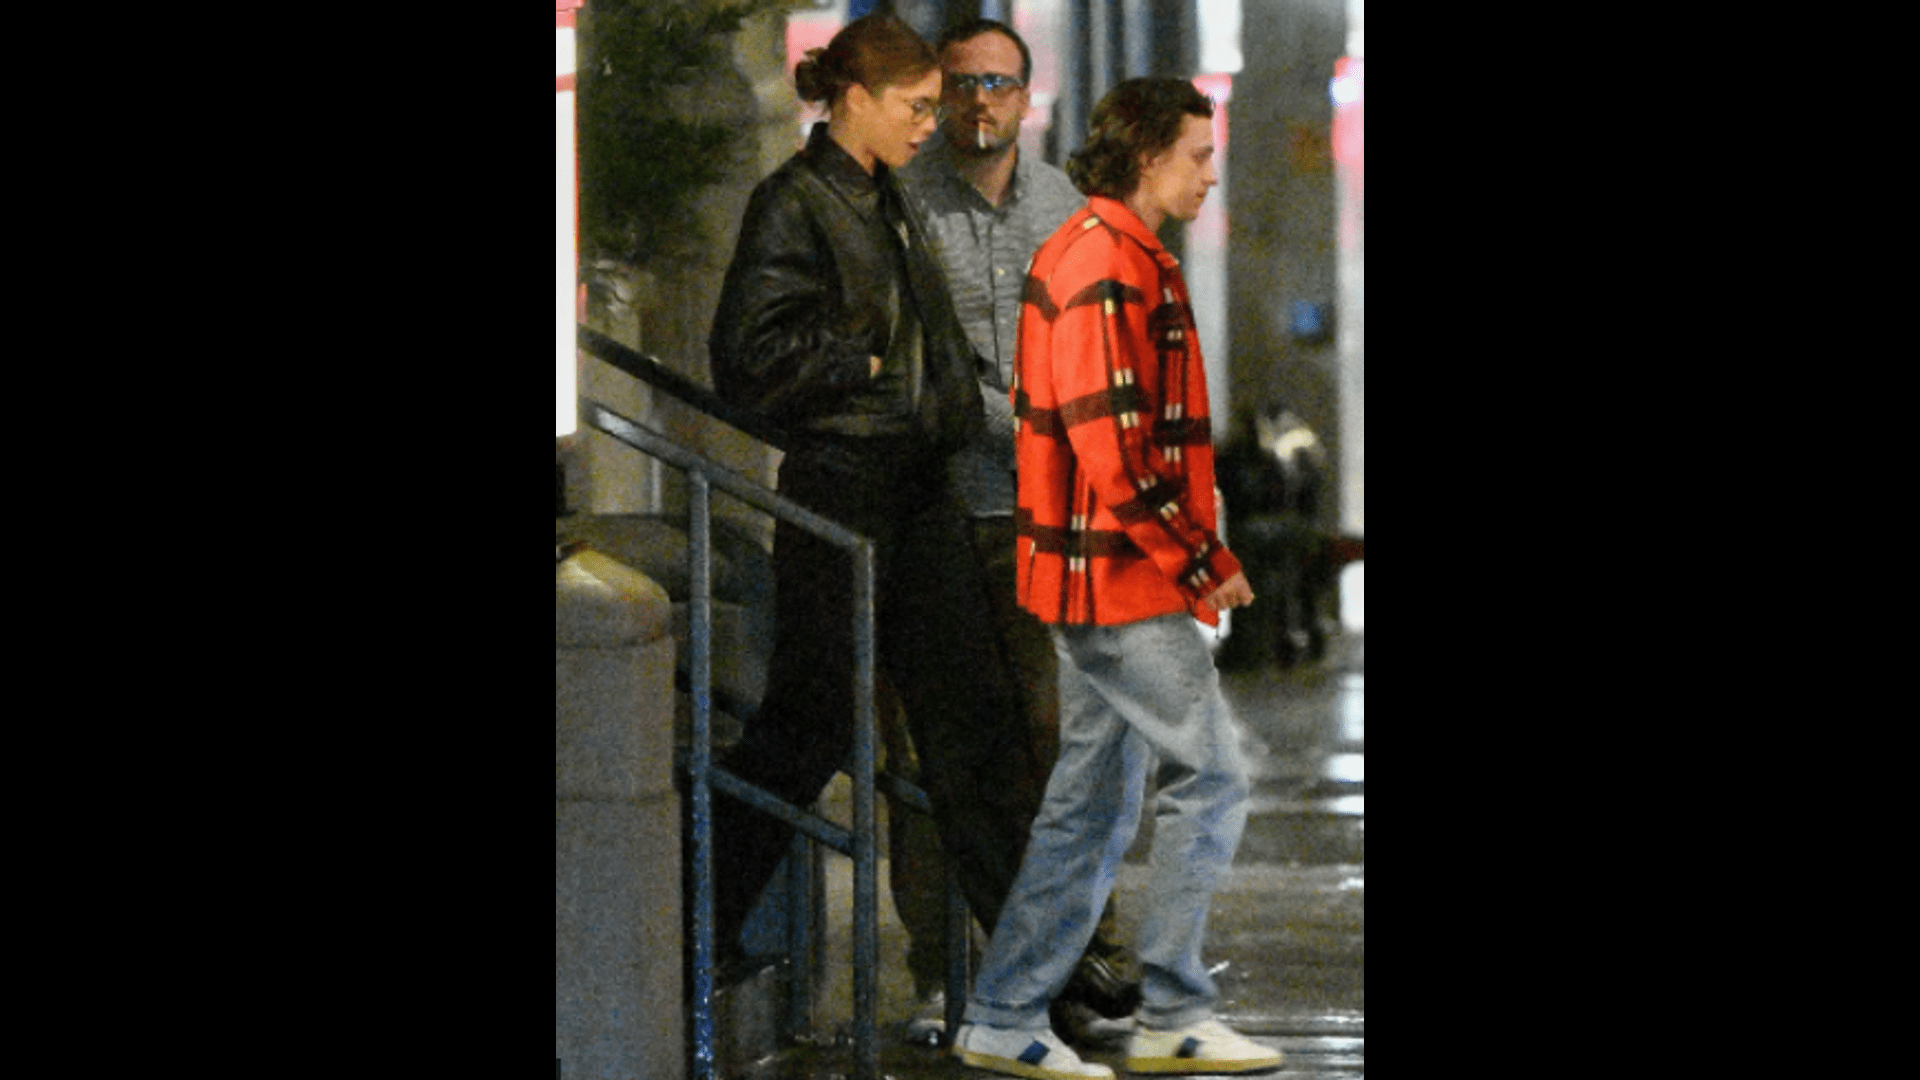 Rainy night in New York: Zendaya and Tom Holland have a romantic date